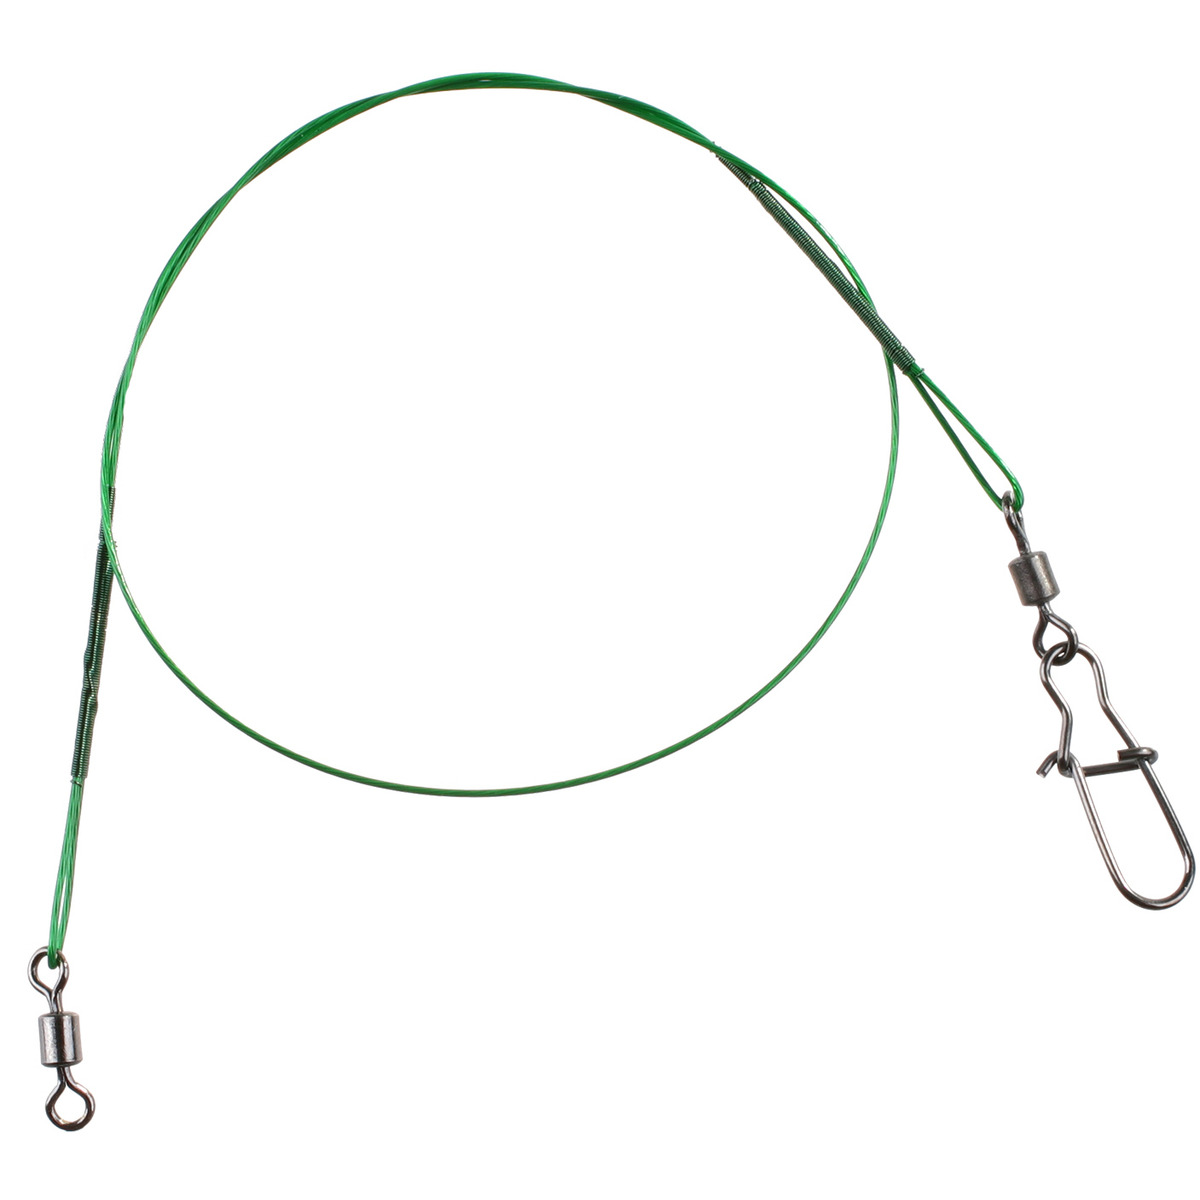 Mikado Steel Leaderwith Swivel And Double Treble Hook - 25 cm / 10kg  GREEN